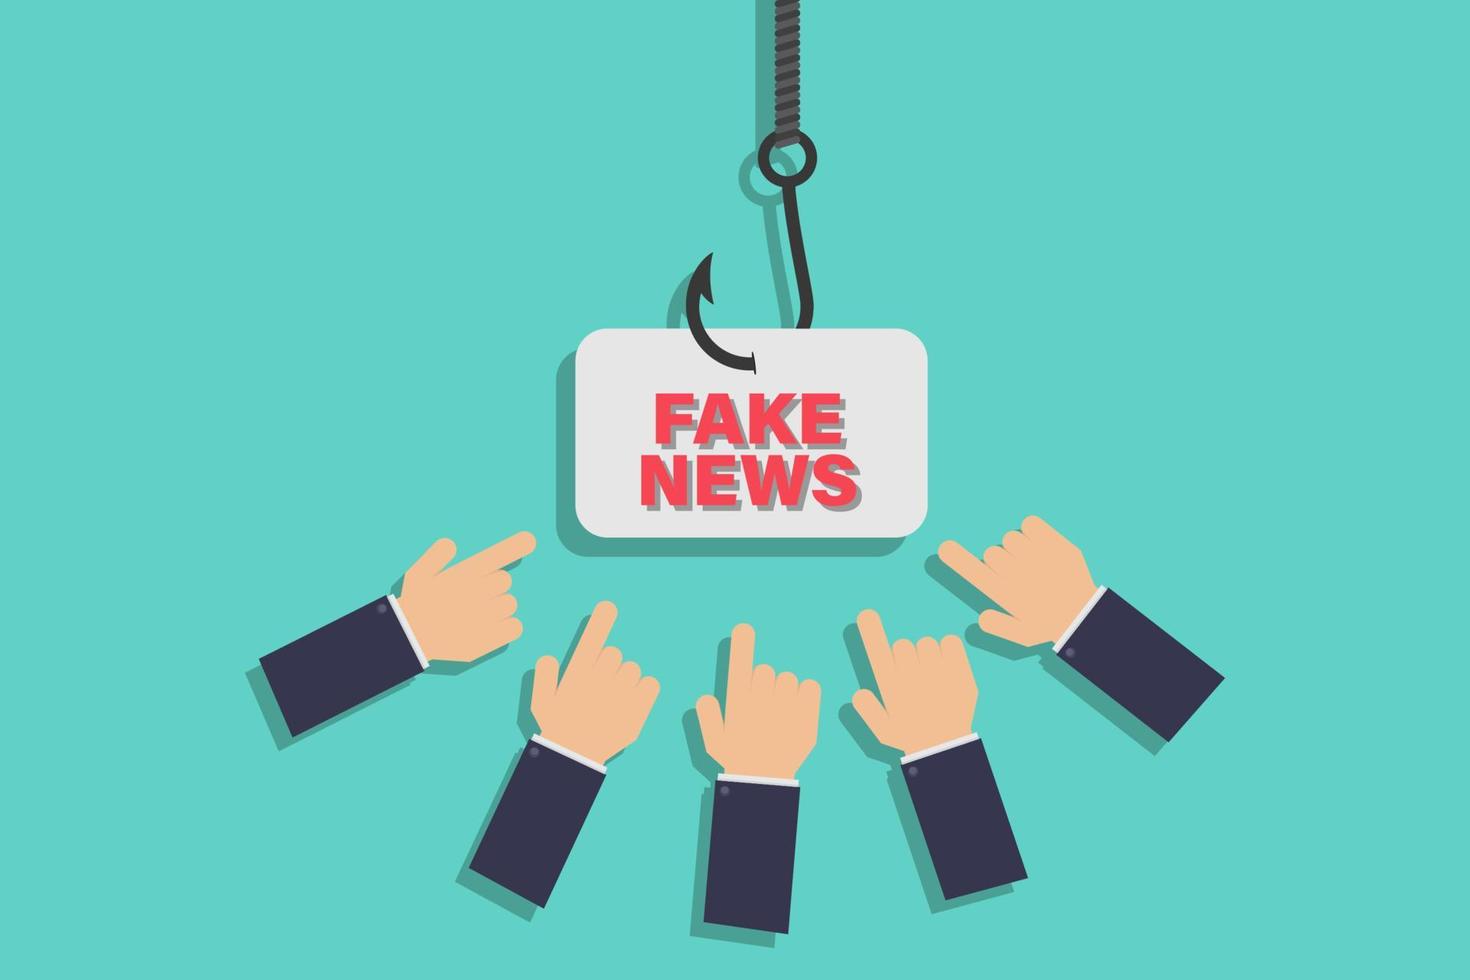 Baiting people with fake news vector illustration